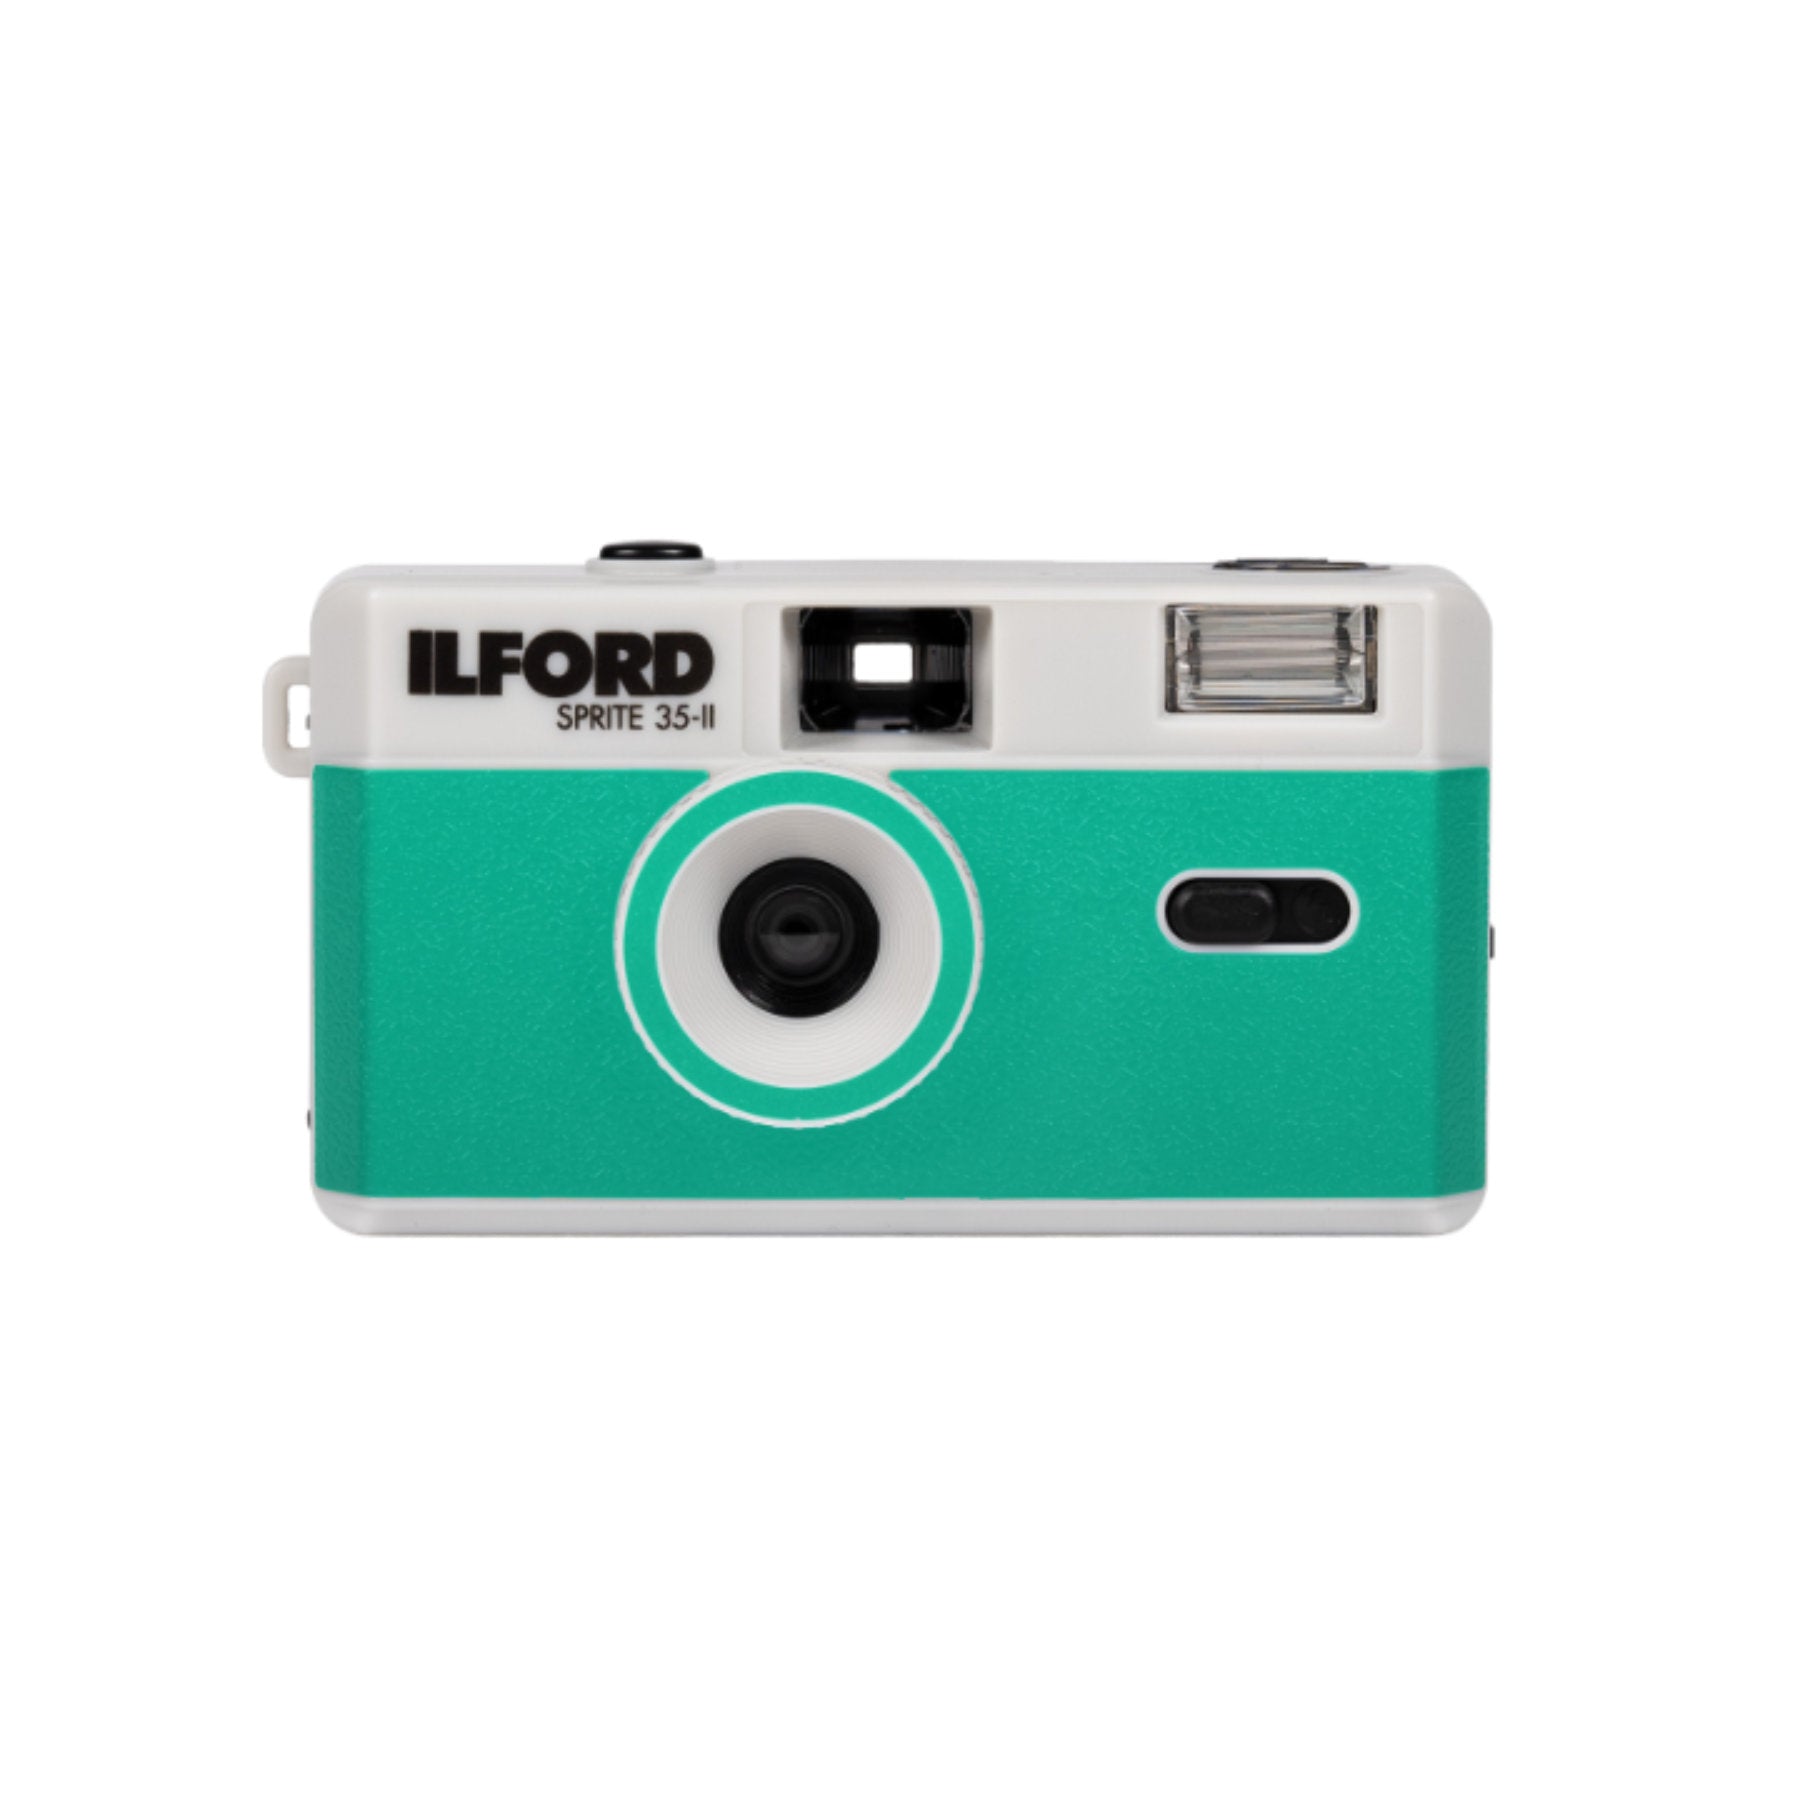 Buy ILFORD SPRITE 35-II reusable film camera - silver & teal at Topic Store